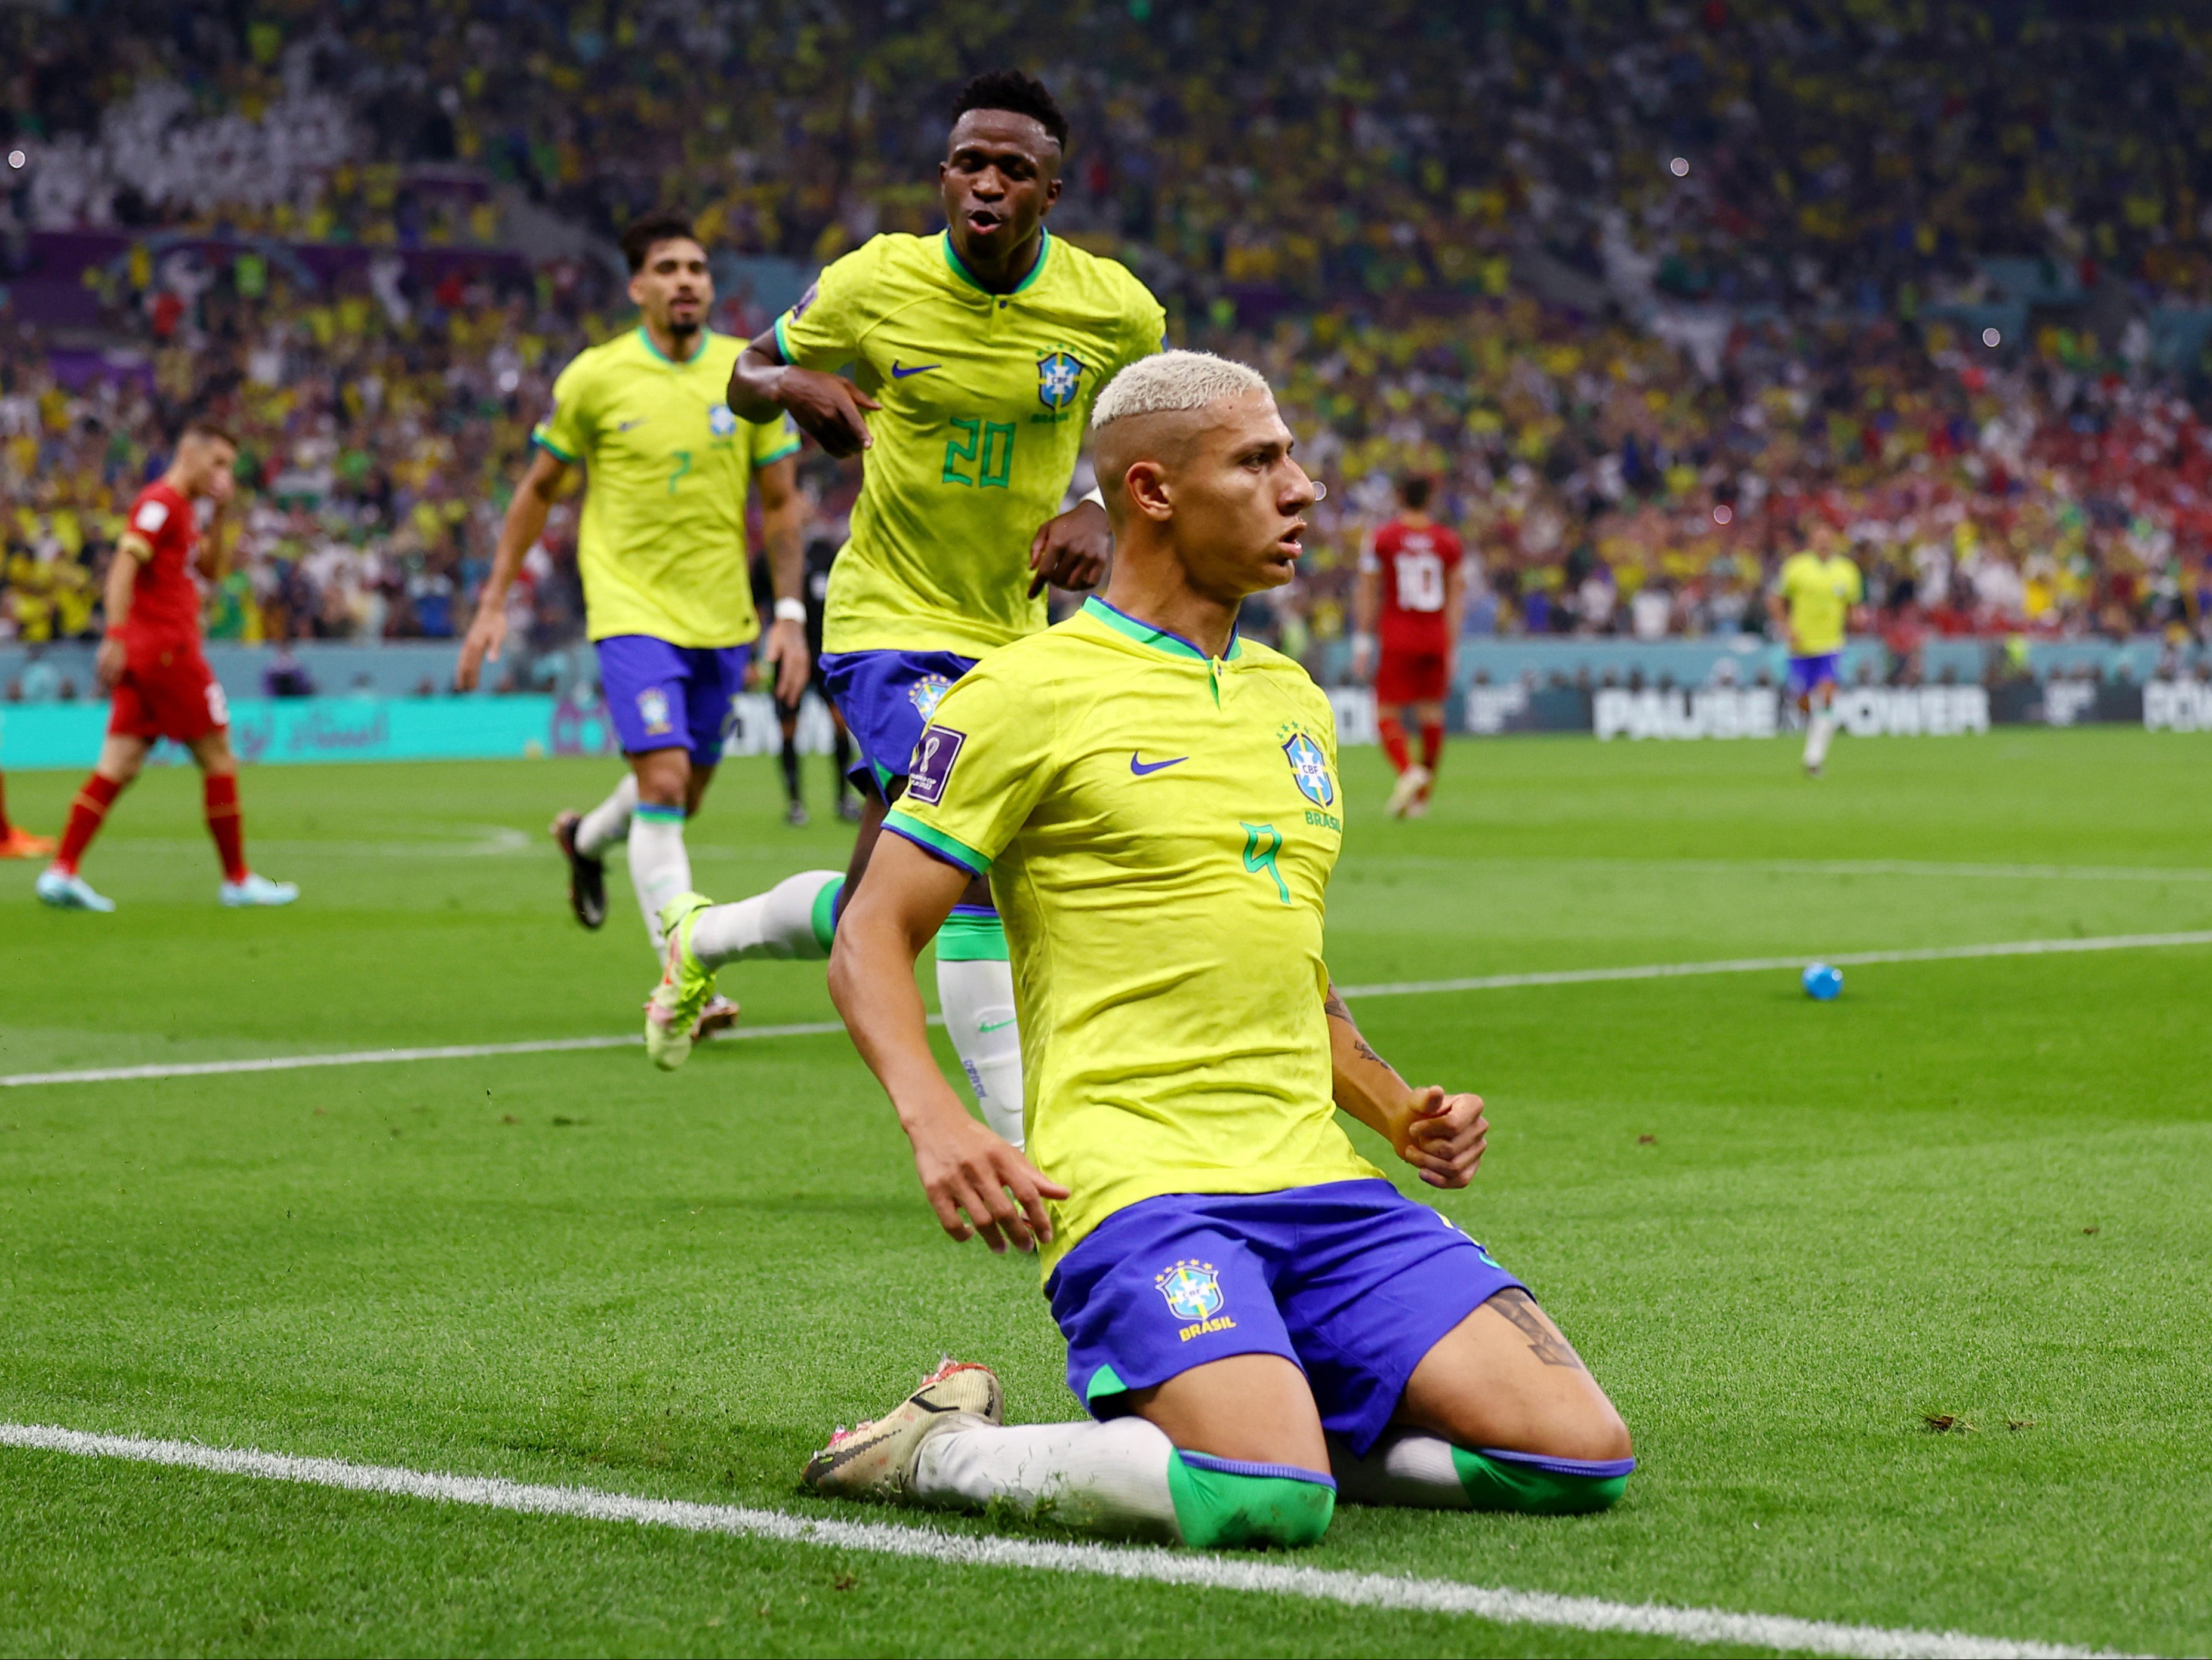 Richarlison’s wondergoal was worth the wait as Brazil started their World Cup in style